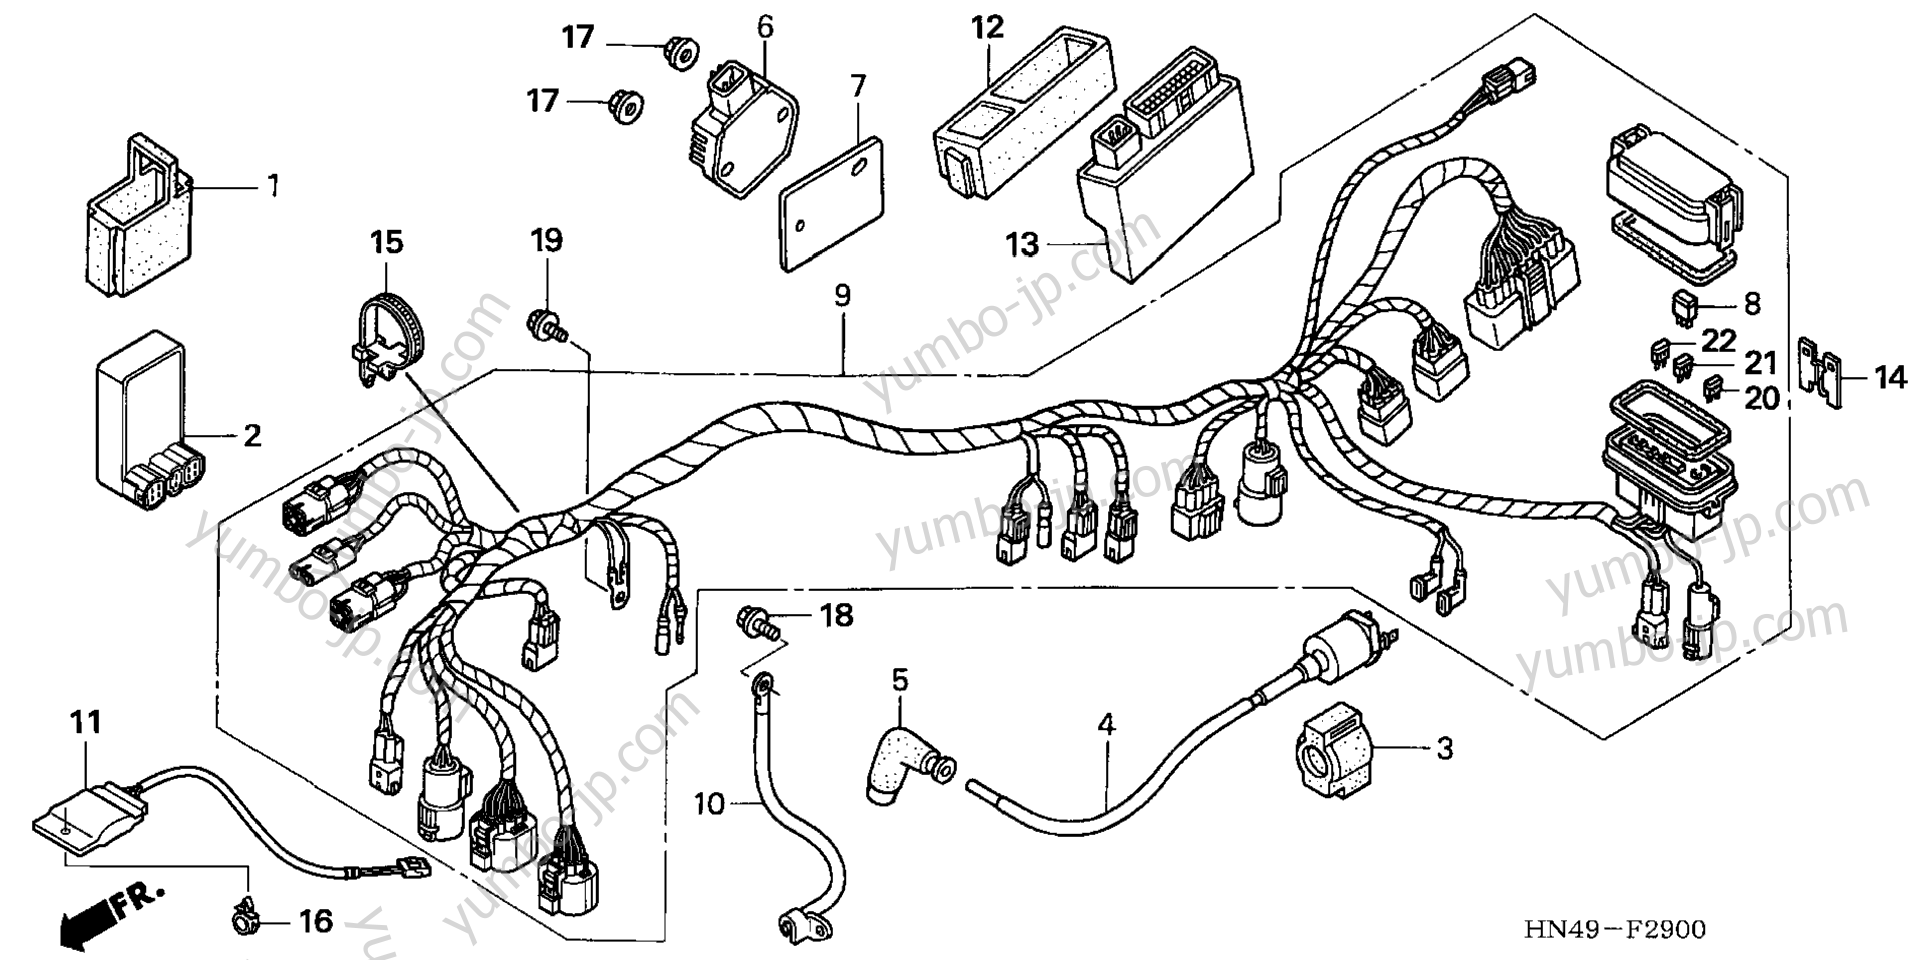 WIRE HARNESS for ATVs HONDA TRX350TE A 2006 year